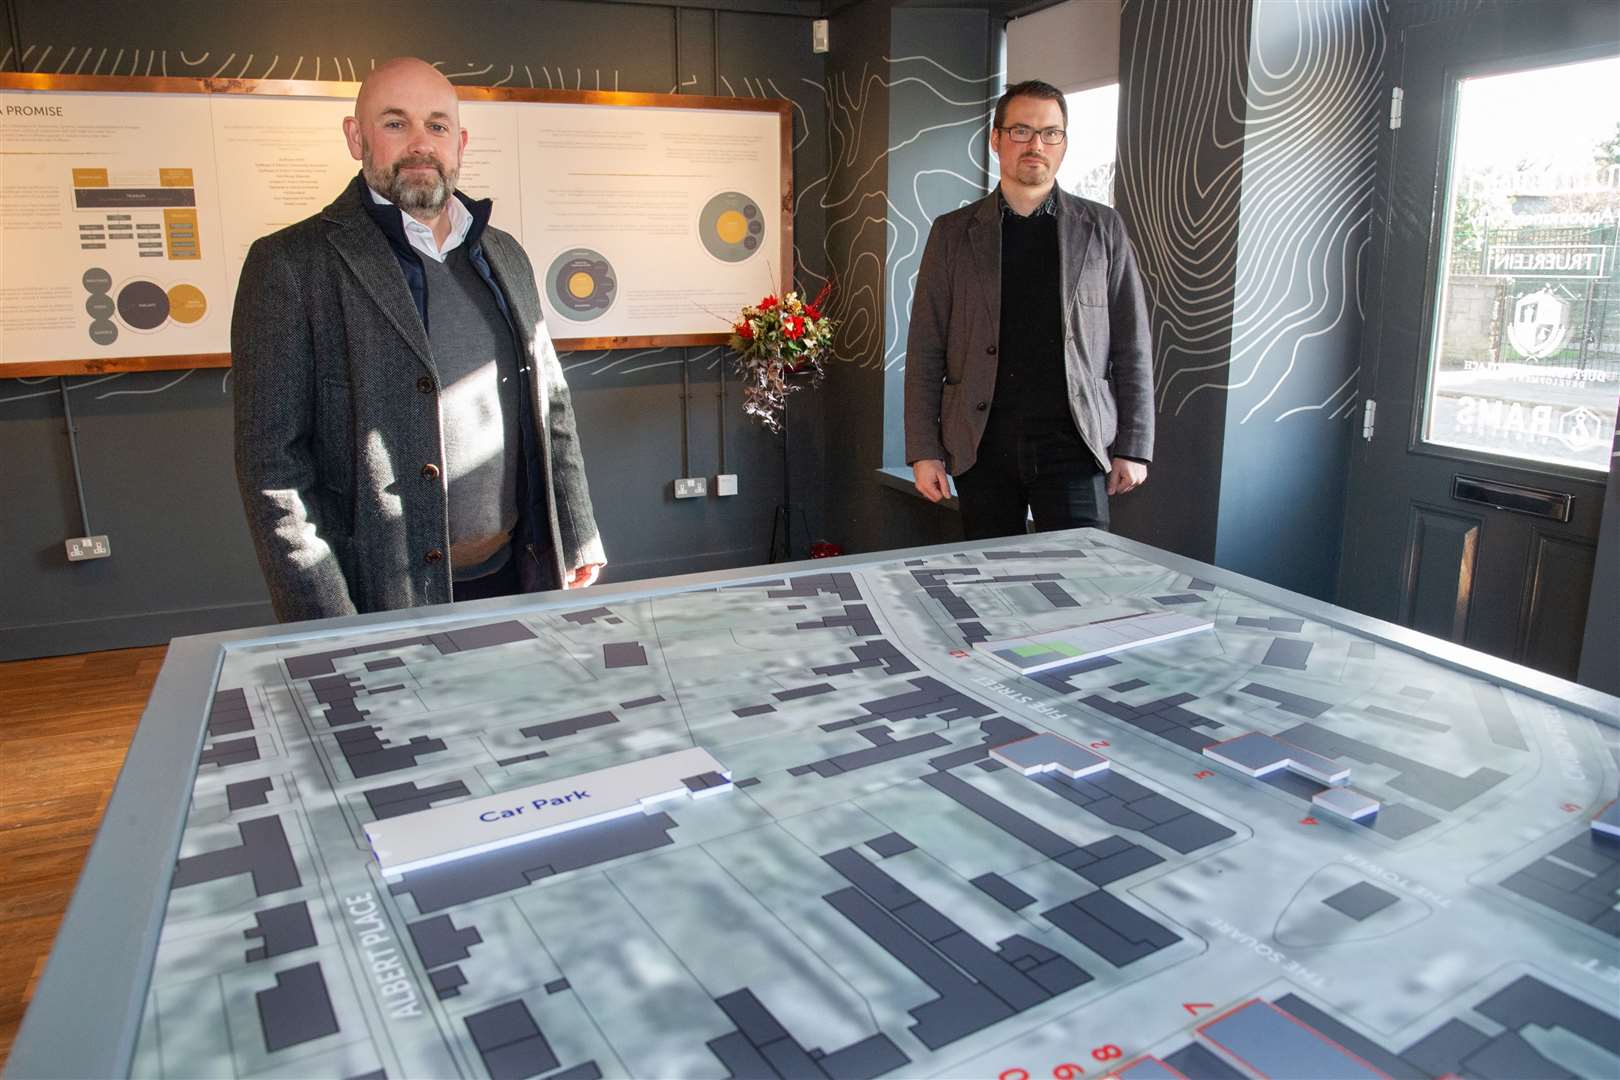 Colin Corson, left, operations manager, food and beverage, and Dr Peter Bye-Jensen, heritage consultant, at the "Dufftown: A New Dawn" project office at the town's Old Post Office, which was set up to showcase the regeneration vision. Picture: Daniel Forsyth.